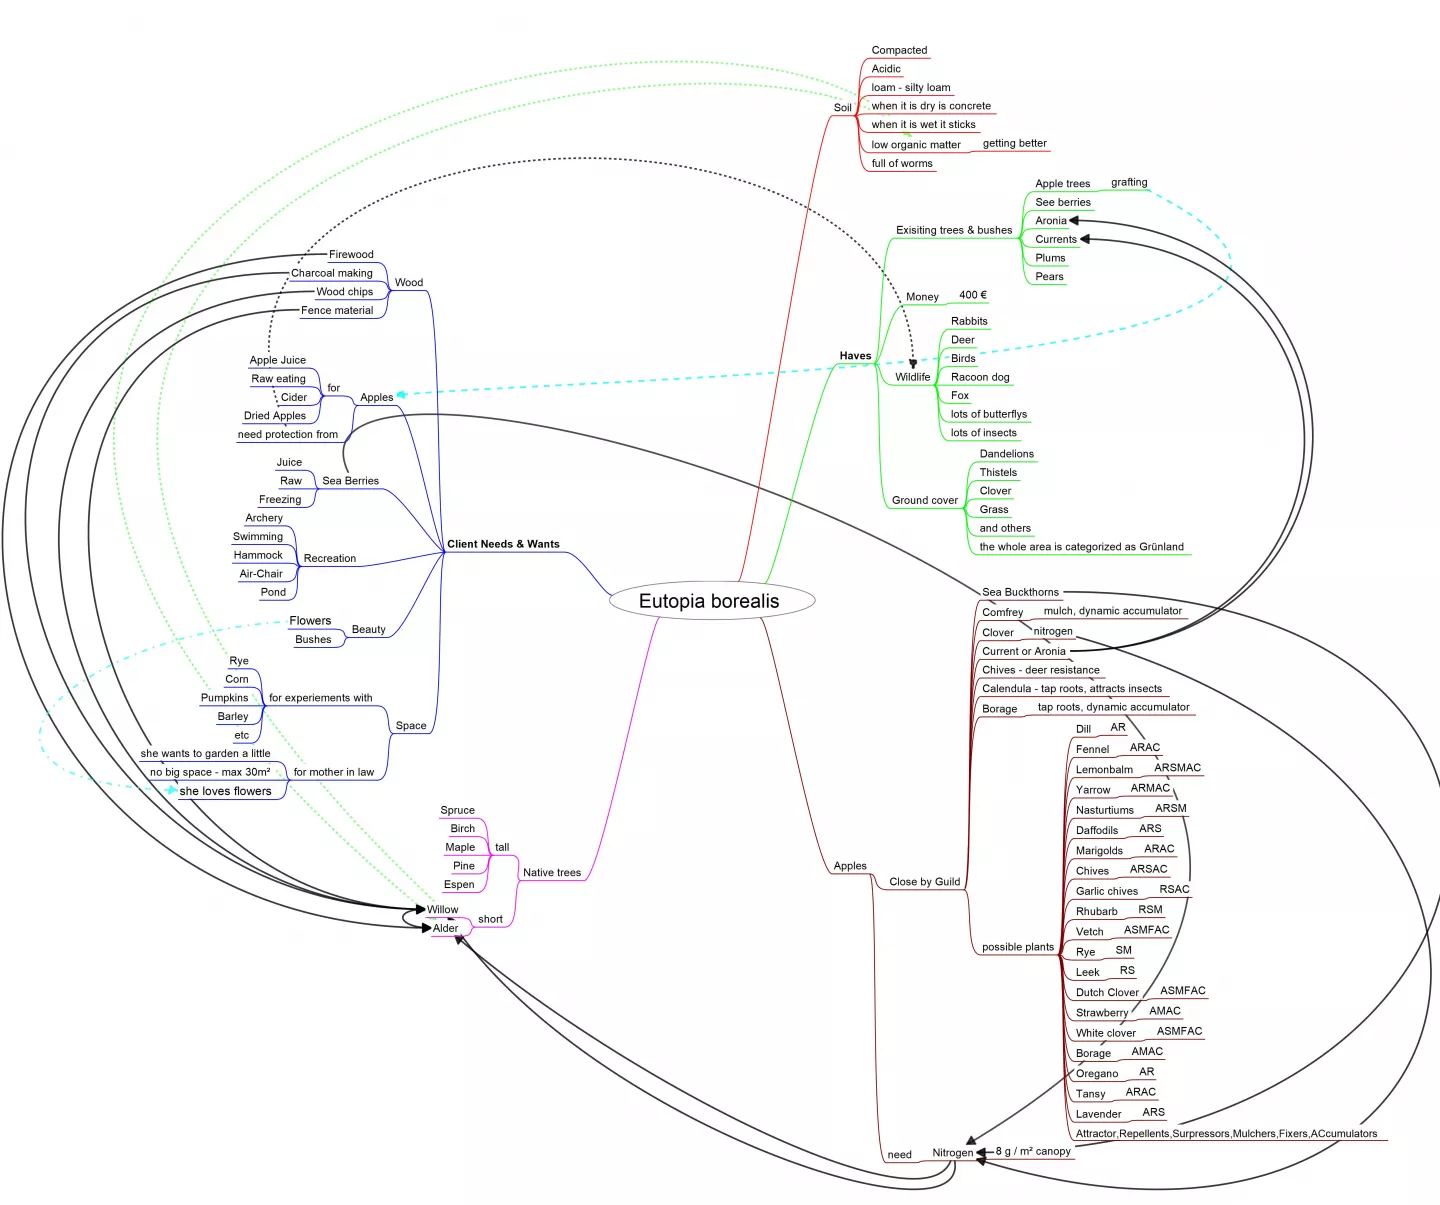 Mind map with all findings and needs